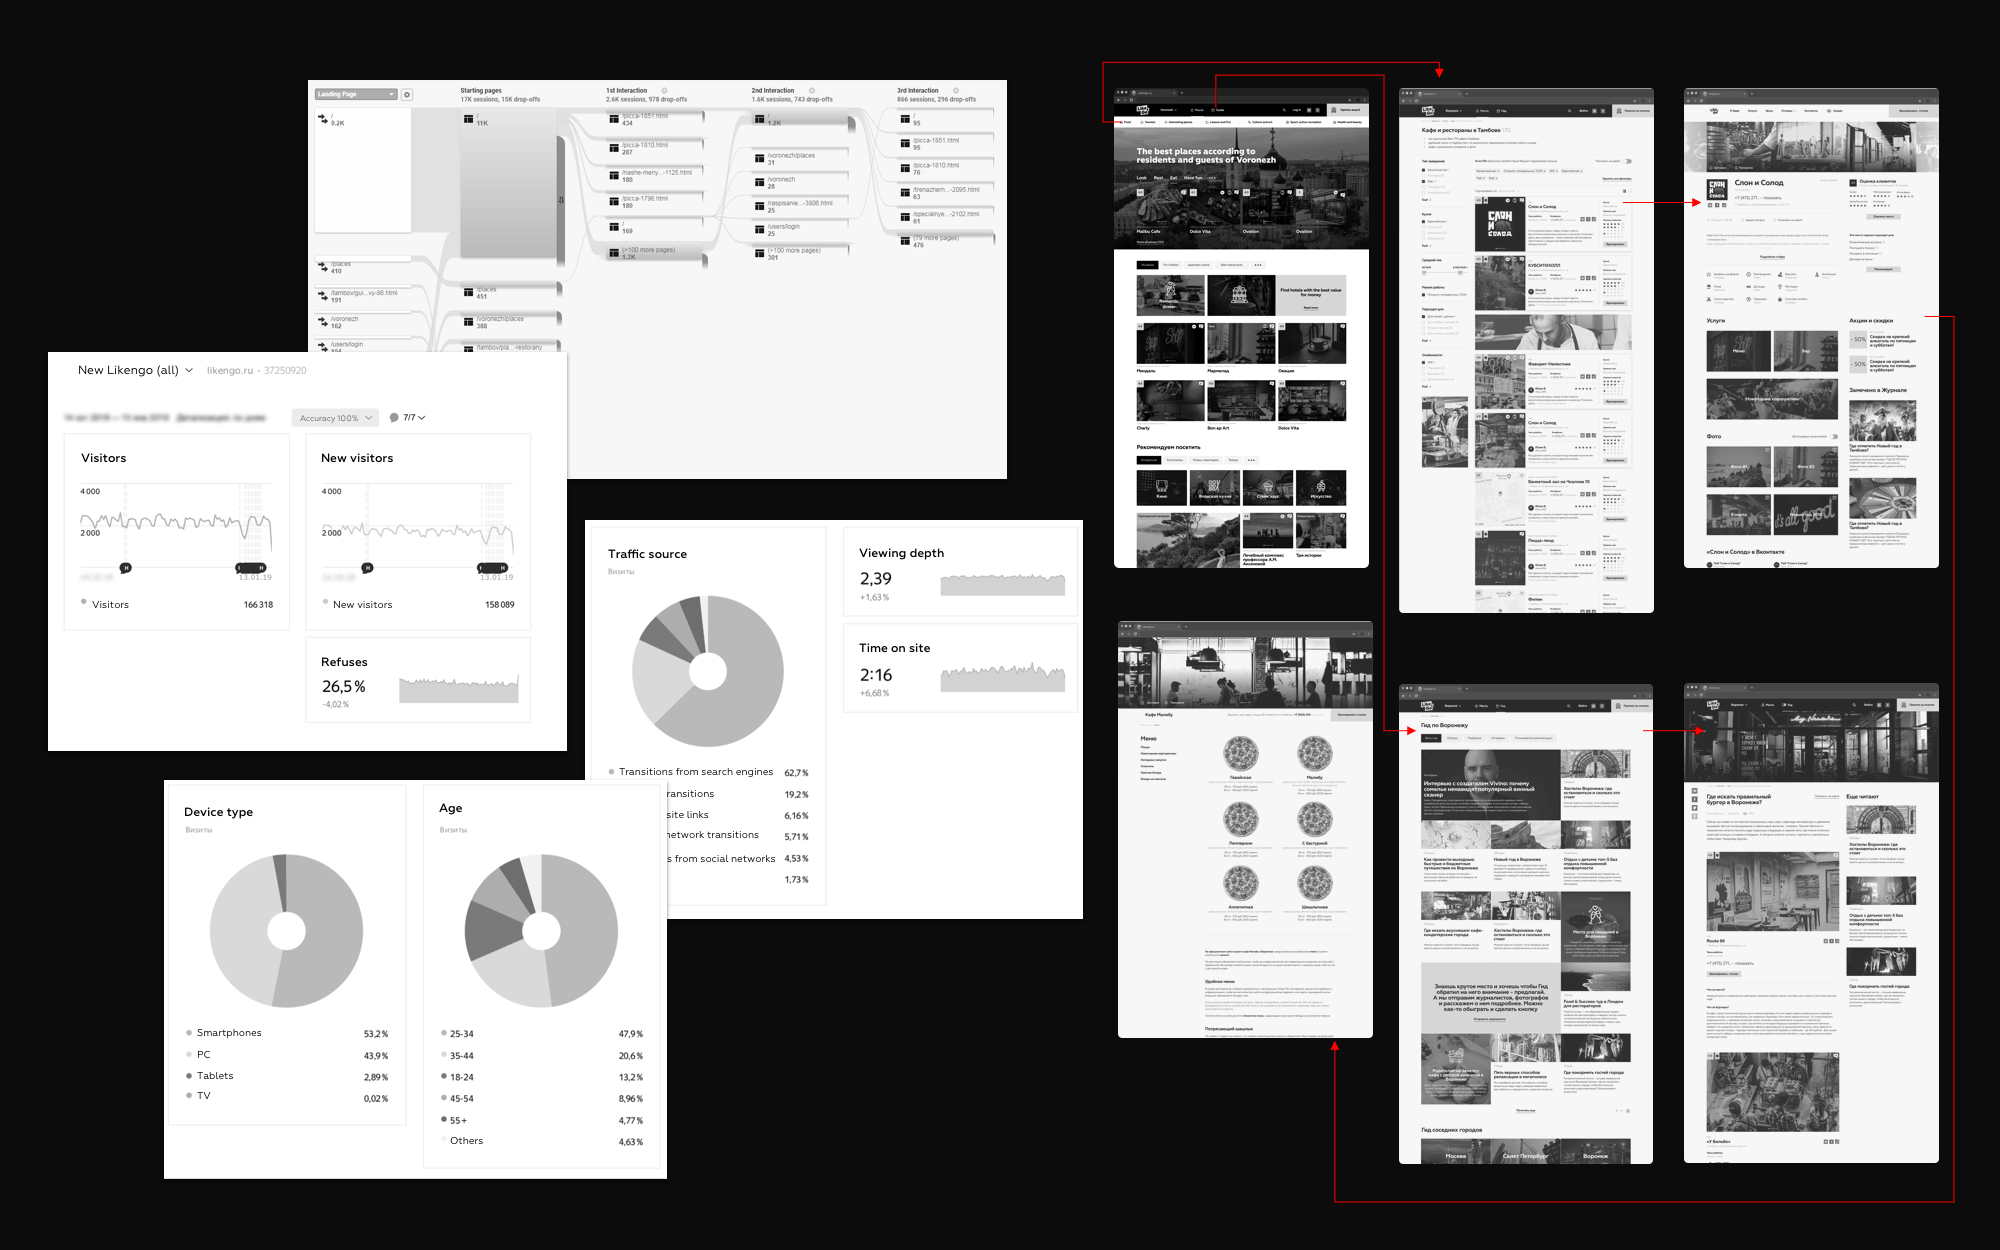 Information structure and wireframing